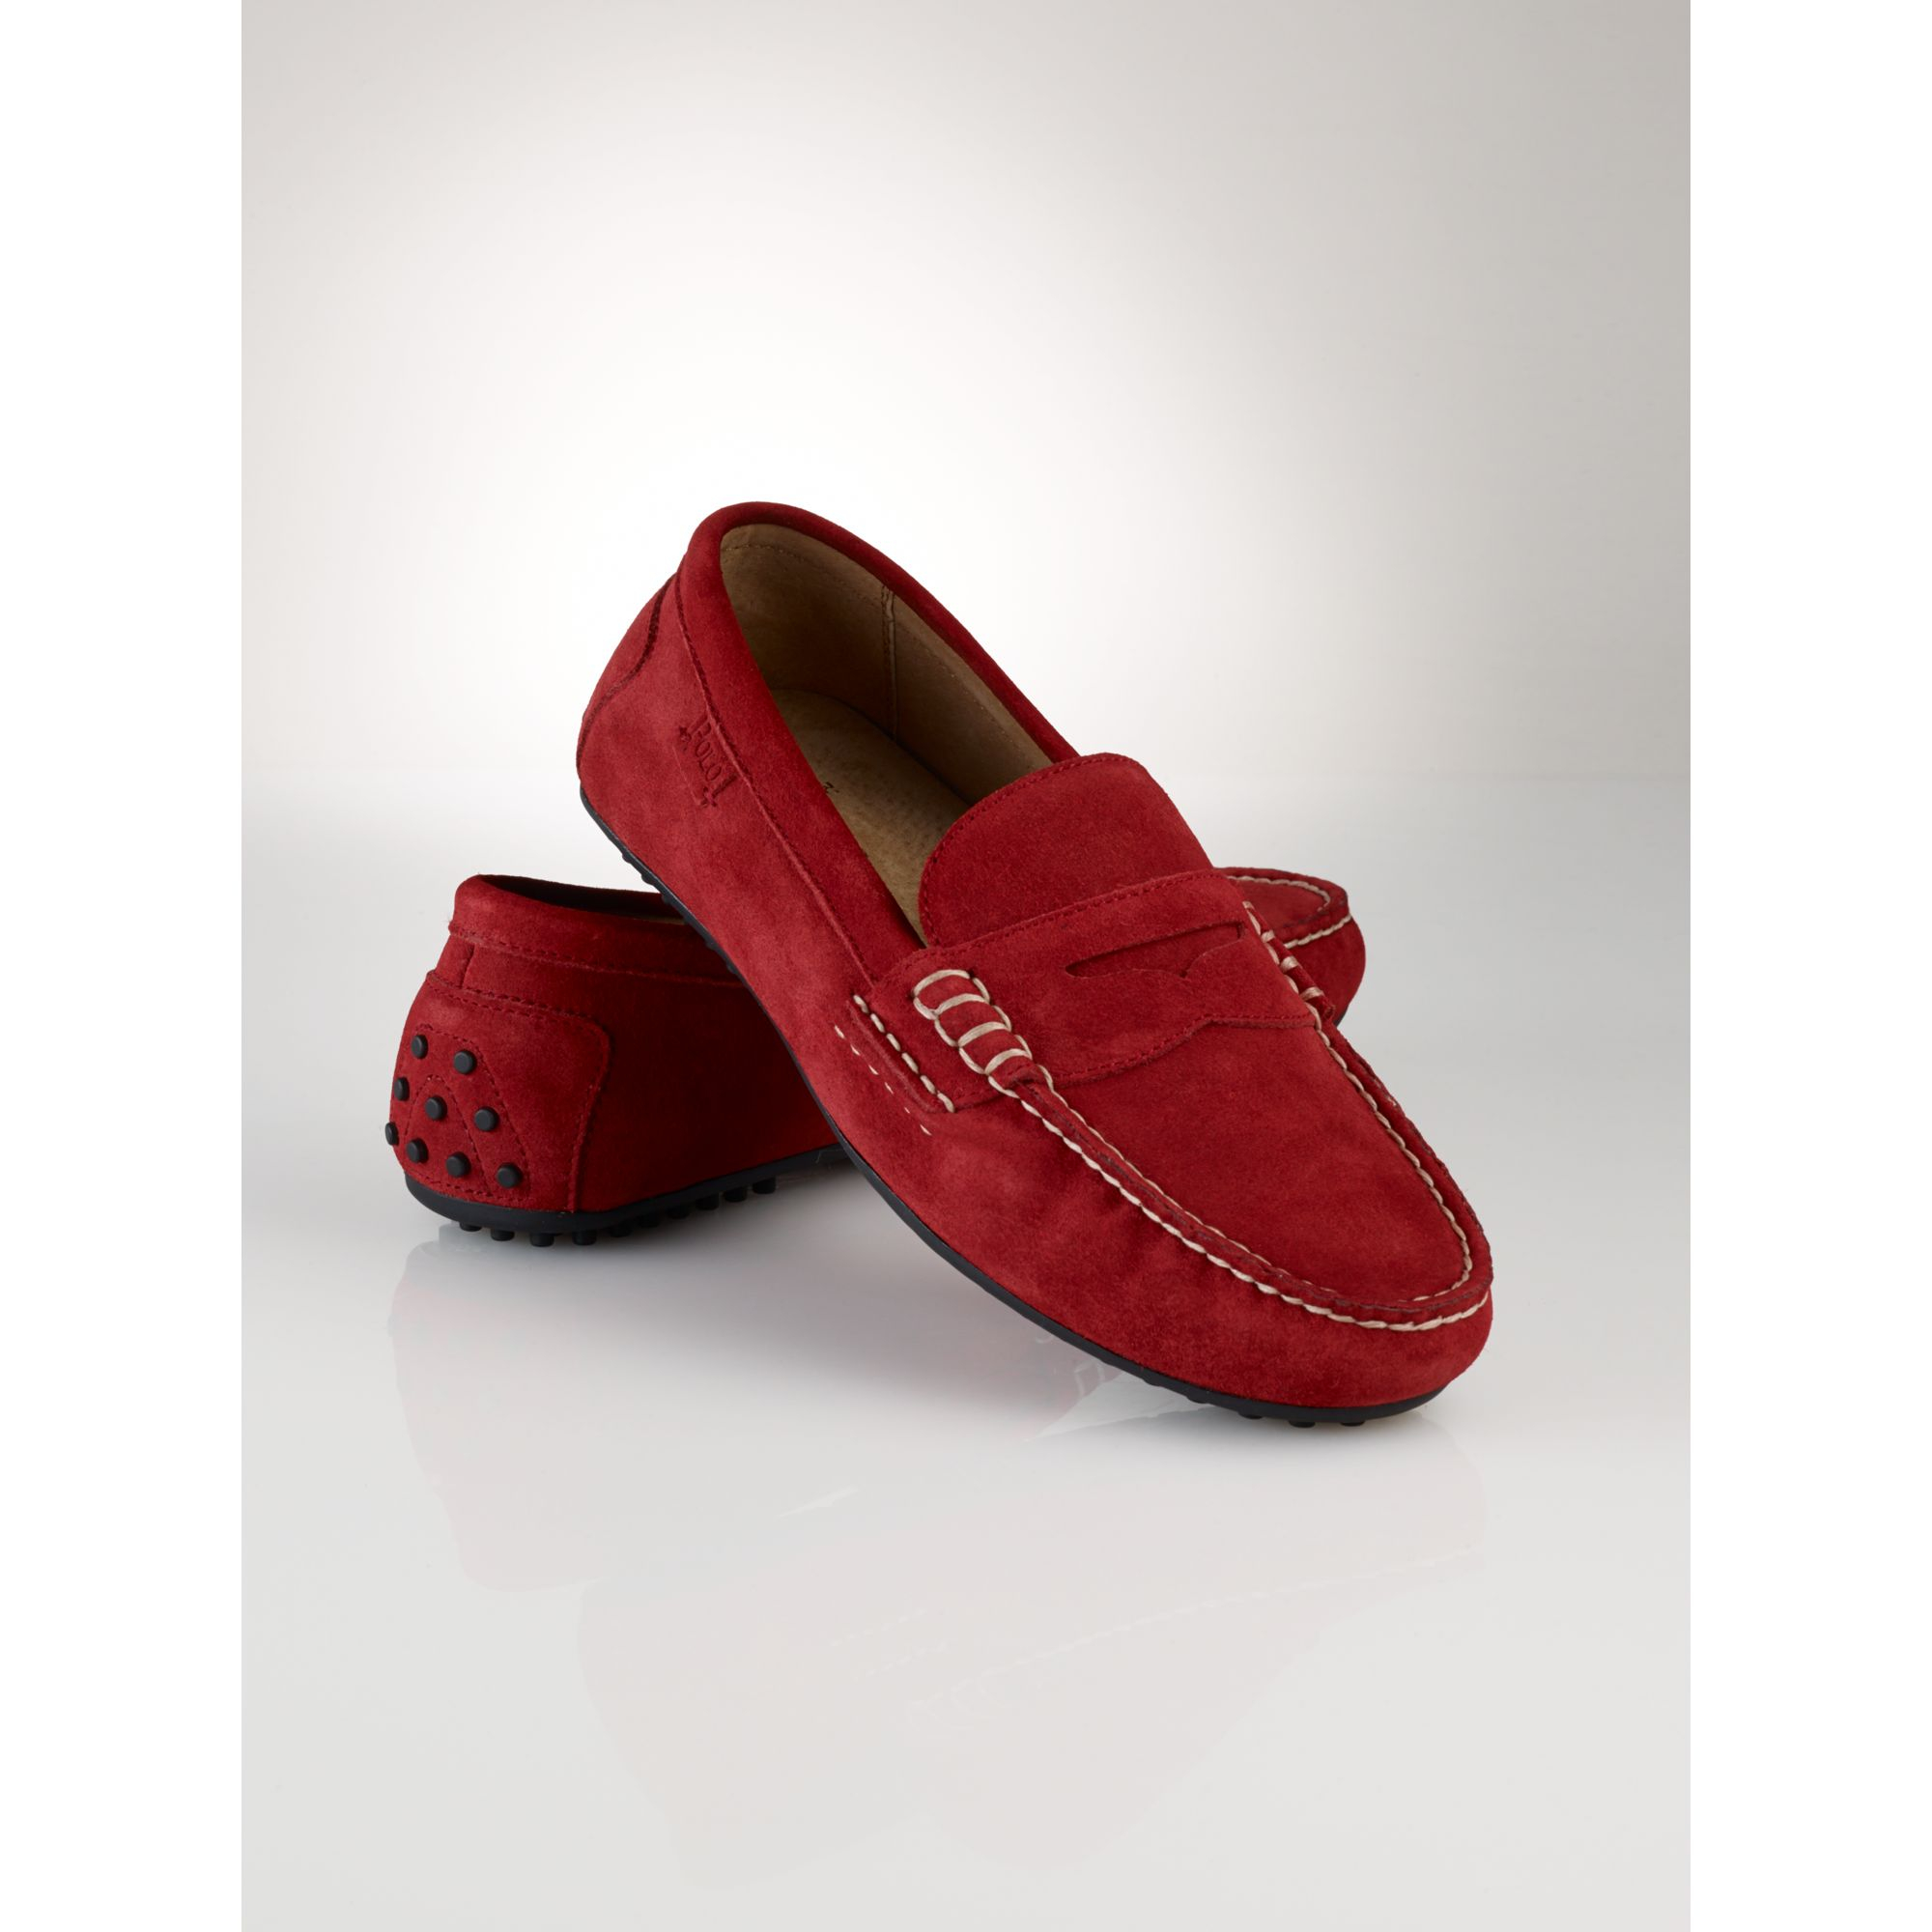 Polo Ralph Lauren Suede Wes Penny Loafer in Red for Men - Lyst